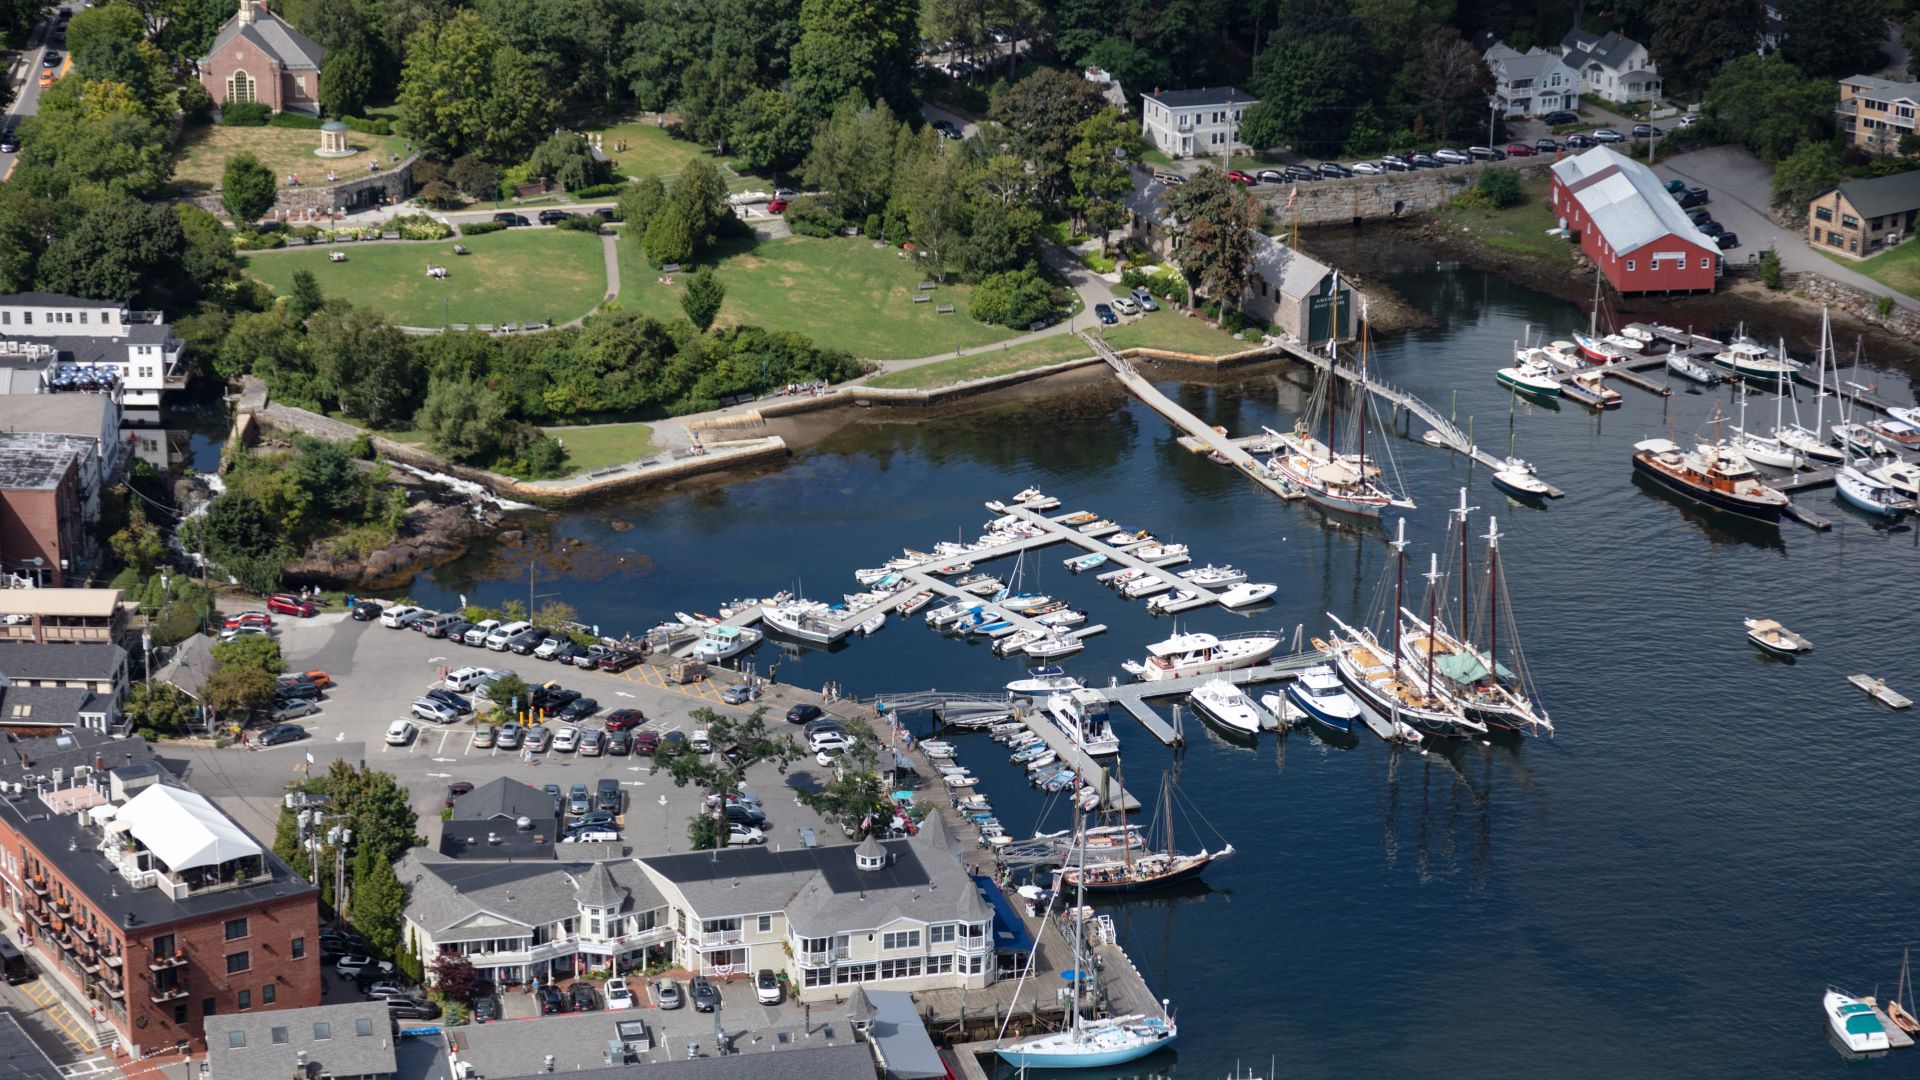 Aerial view of Camden Harbor showing how close a parking lot and public grass area is to the water